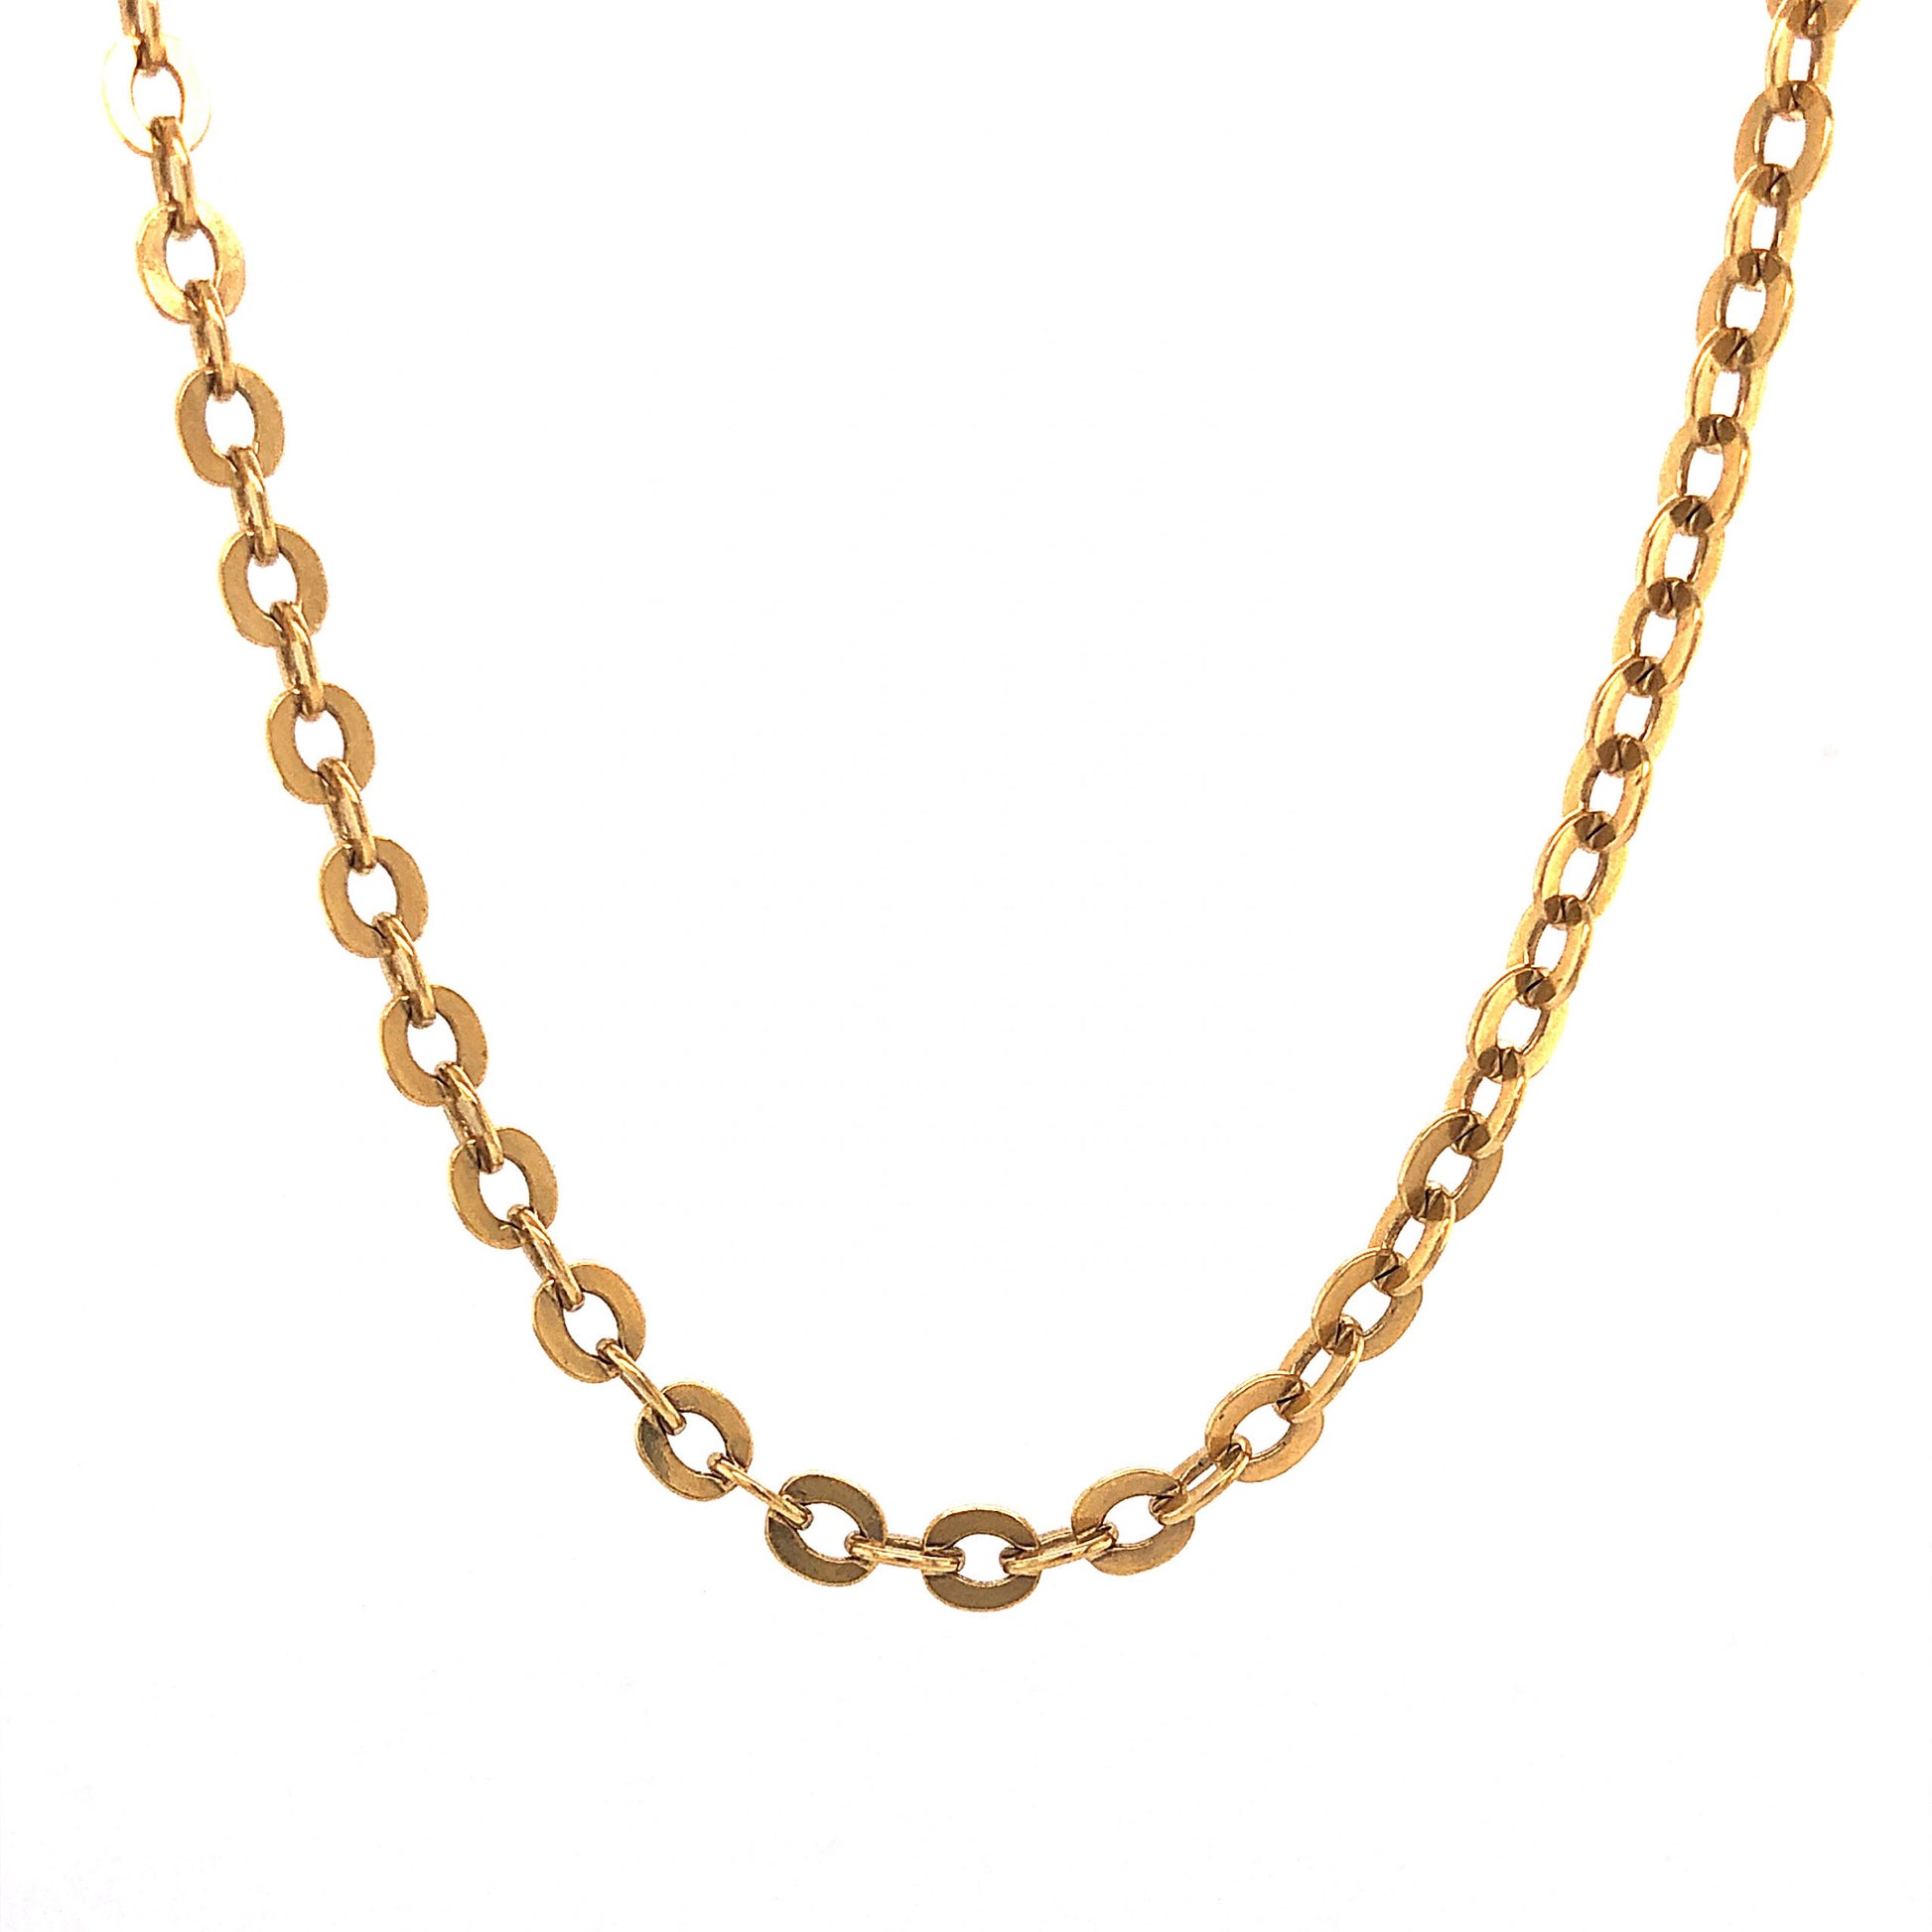 24 Inch Mid-Century Chain Necklace in 18k Yellow GoldComposition: 18 Karat Yellow GoldTotal Gram Weight: 17.7 gInscription: 750